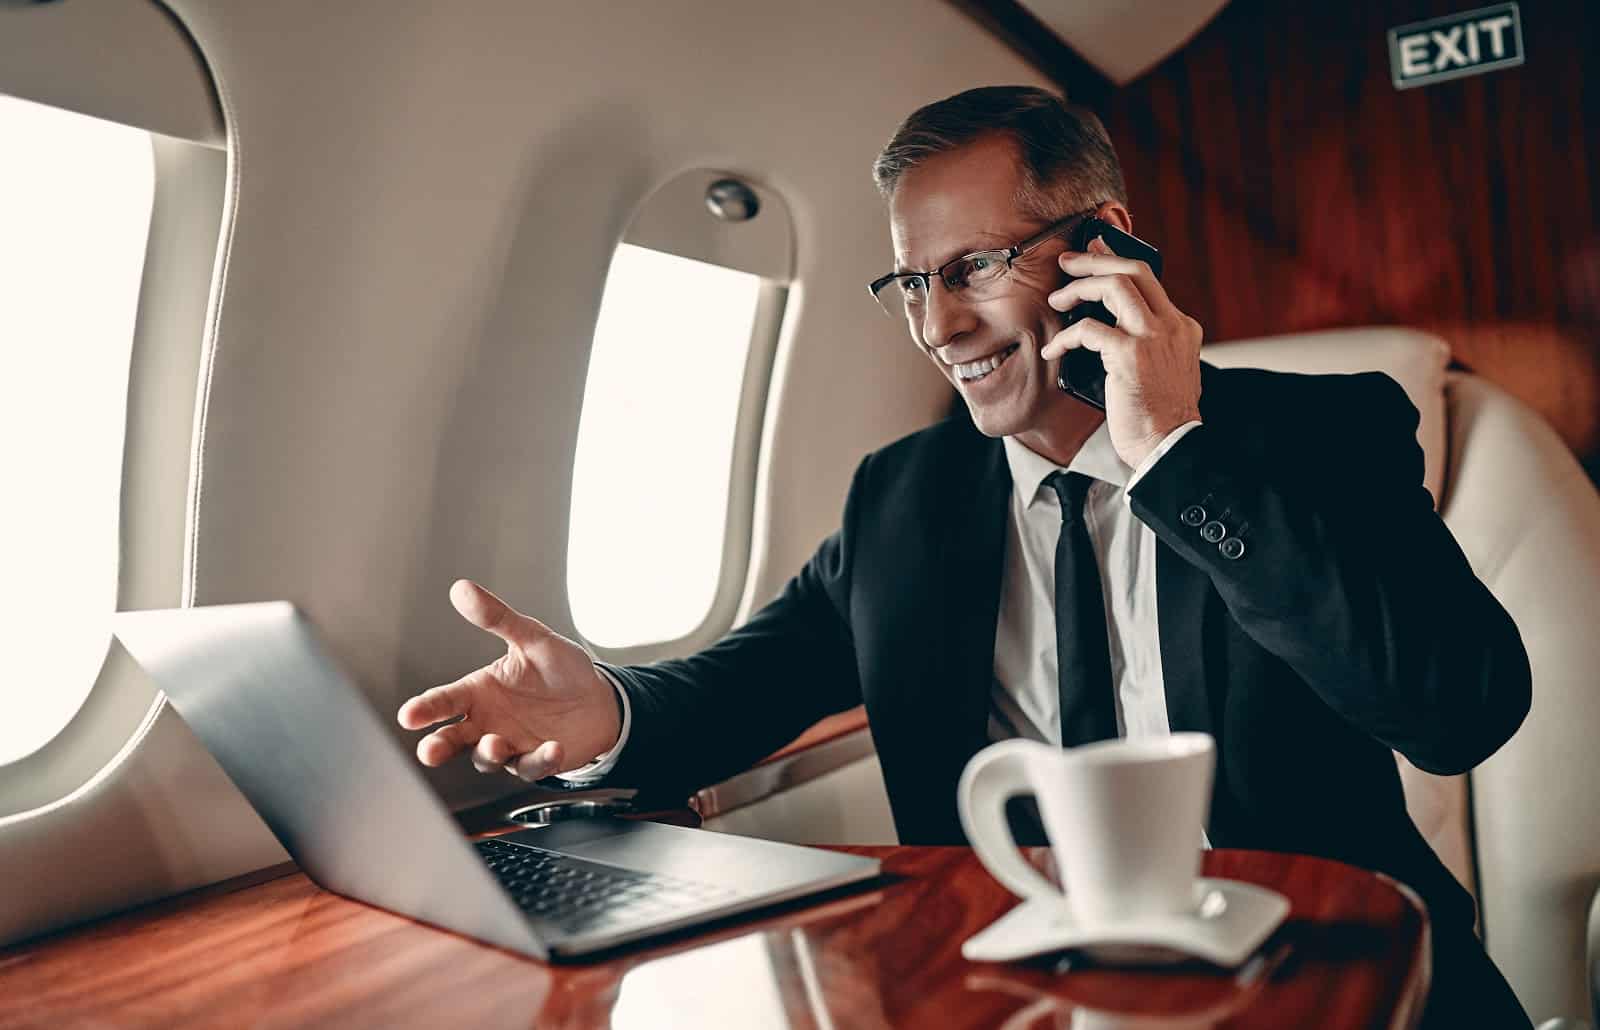 What is a chartered flight: A smiling business man gestures at his laptop on a private plane